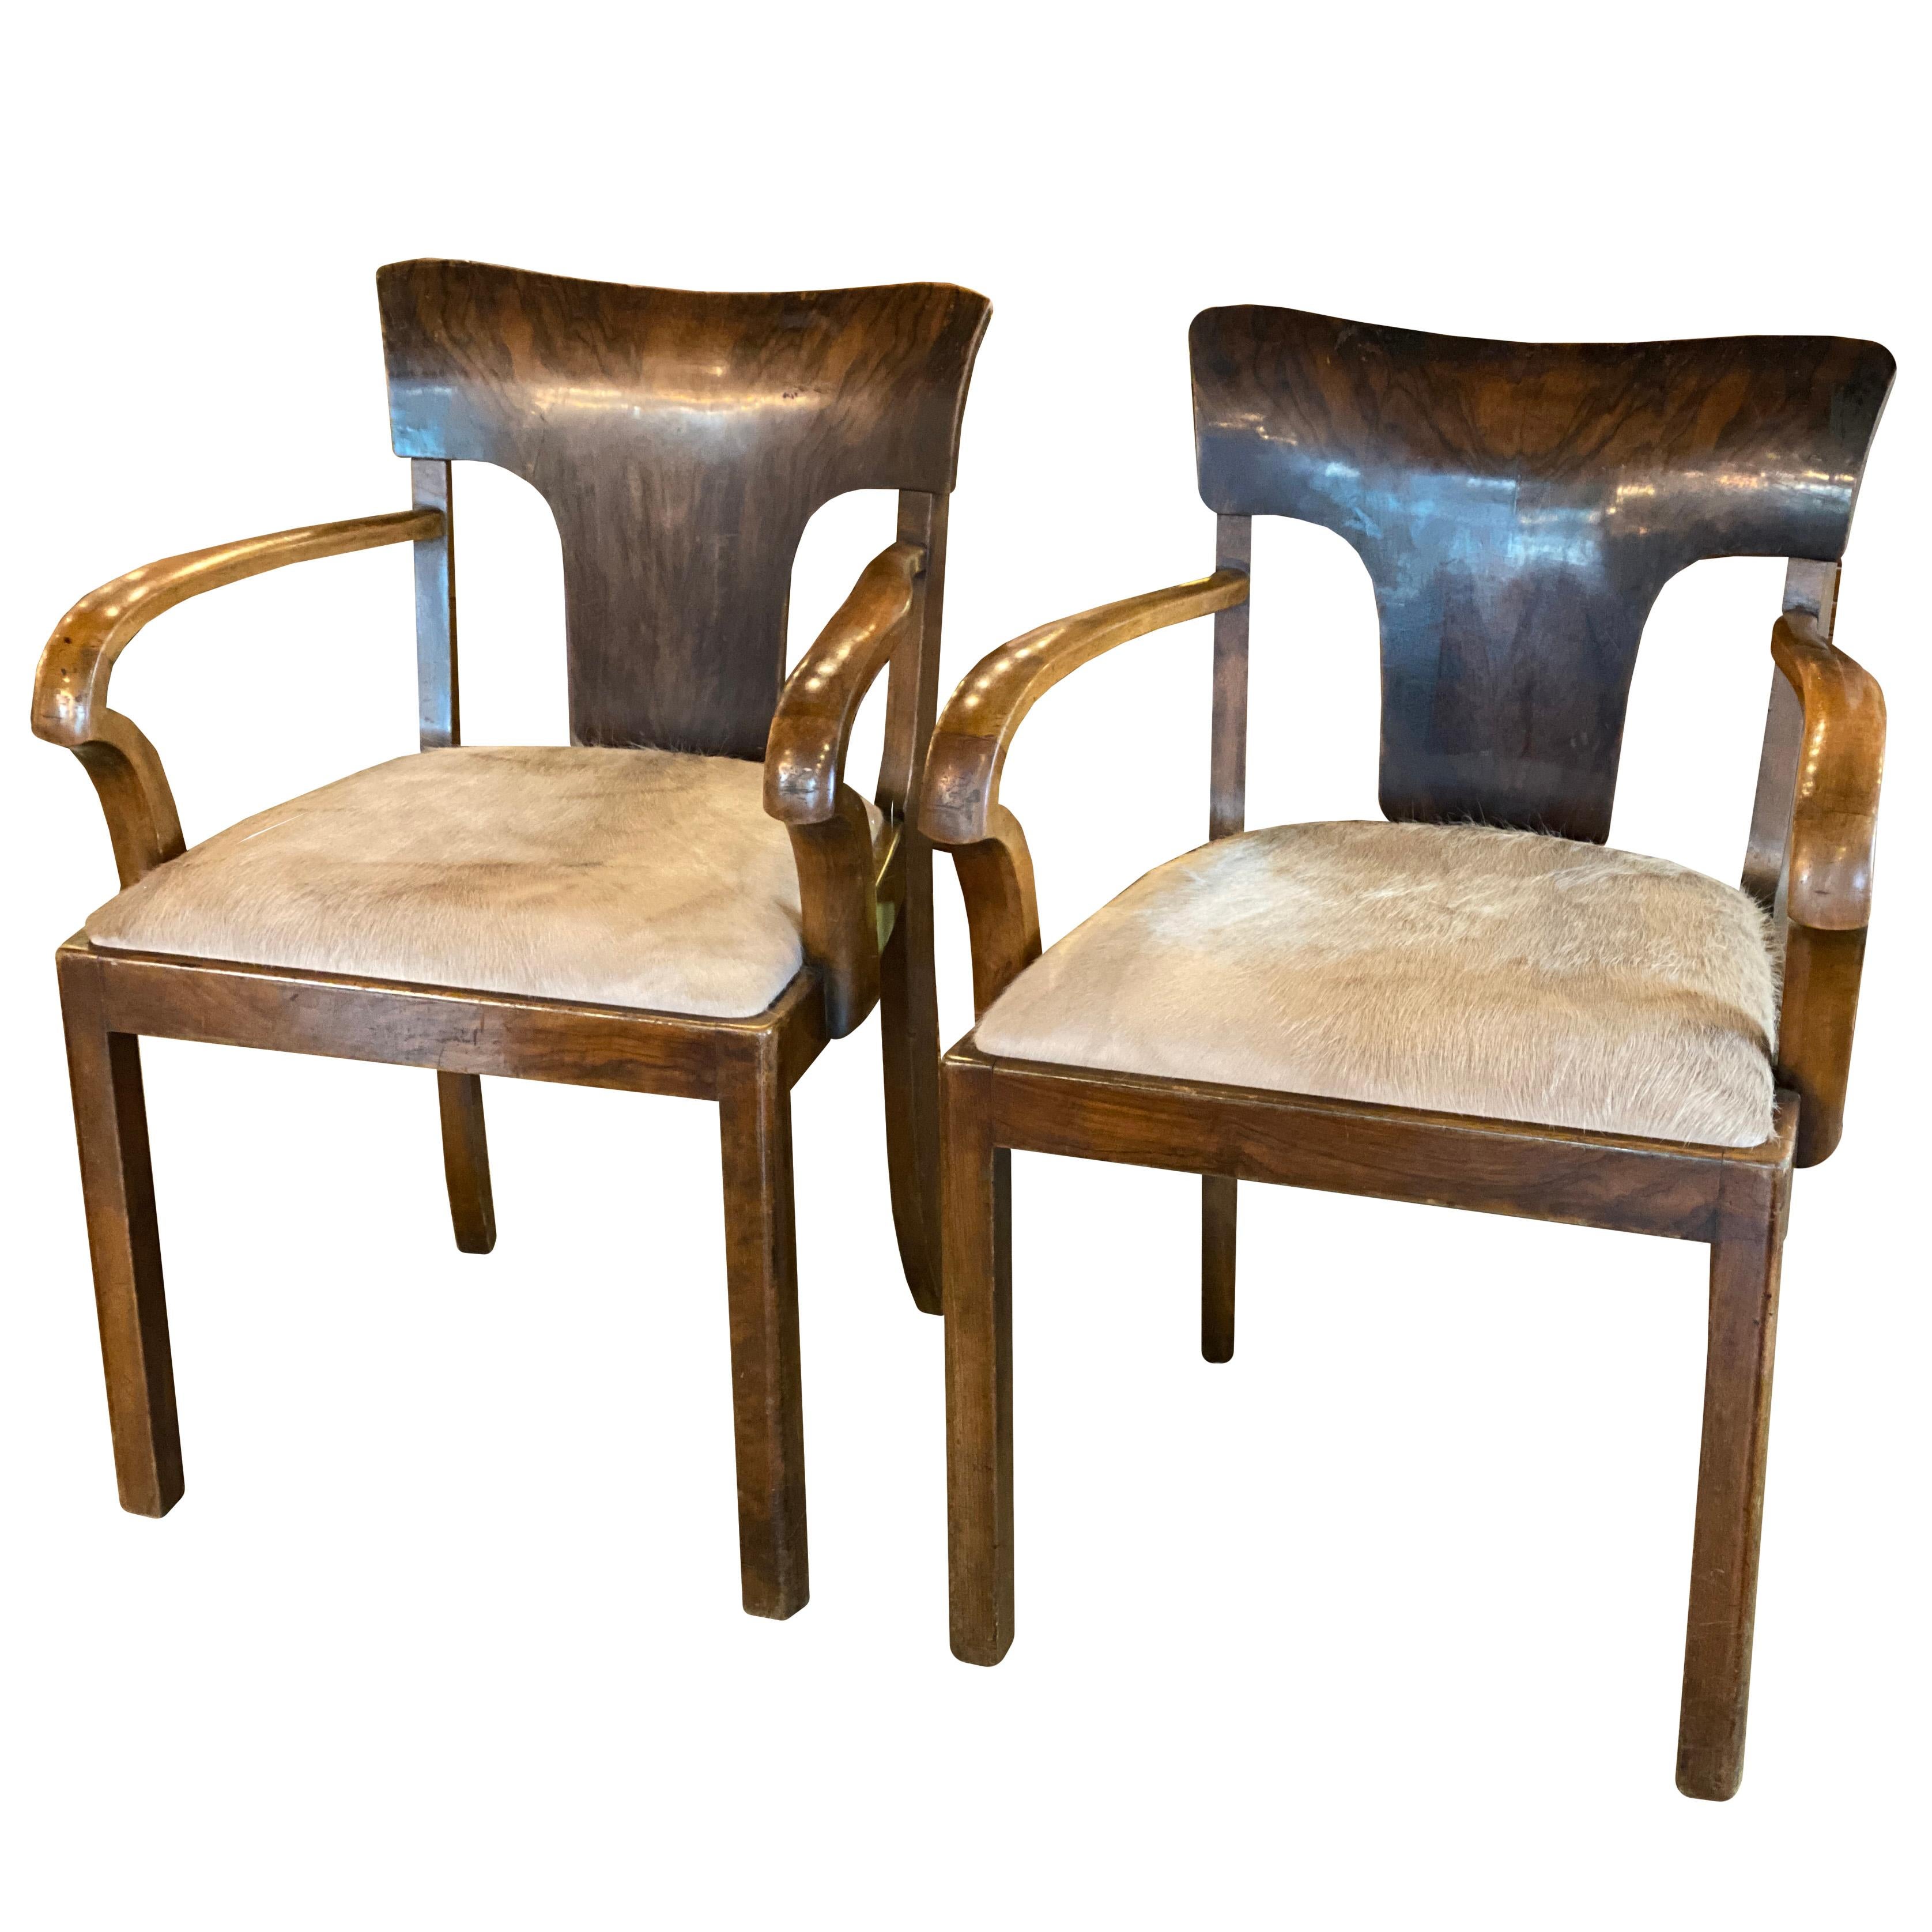 Pair of Art Deco armchairs with fine burled or flamed backs and solid wood frames. Recently updated with taupe hair-on hide upholstered seats. Comfortable and generous seats for home, dining or office. Europe, 1930's. 

Measure: Arm height: 27.5